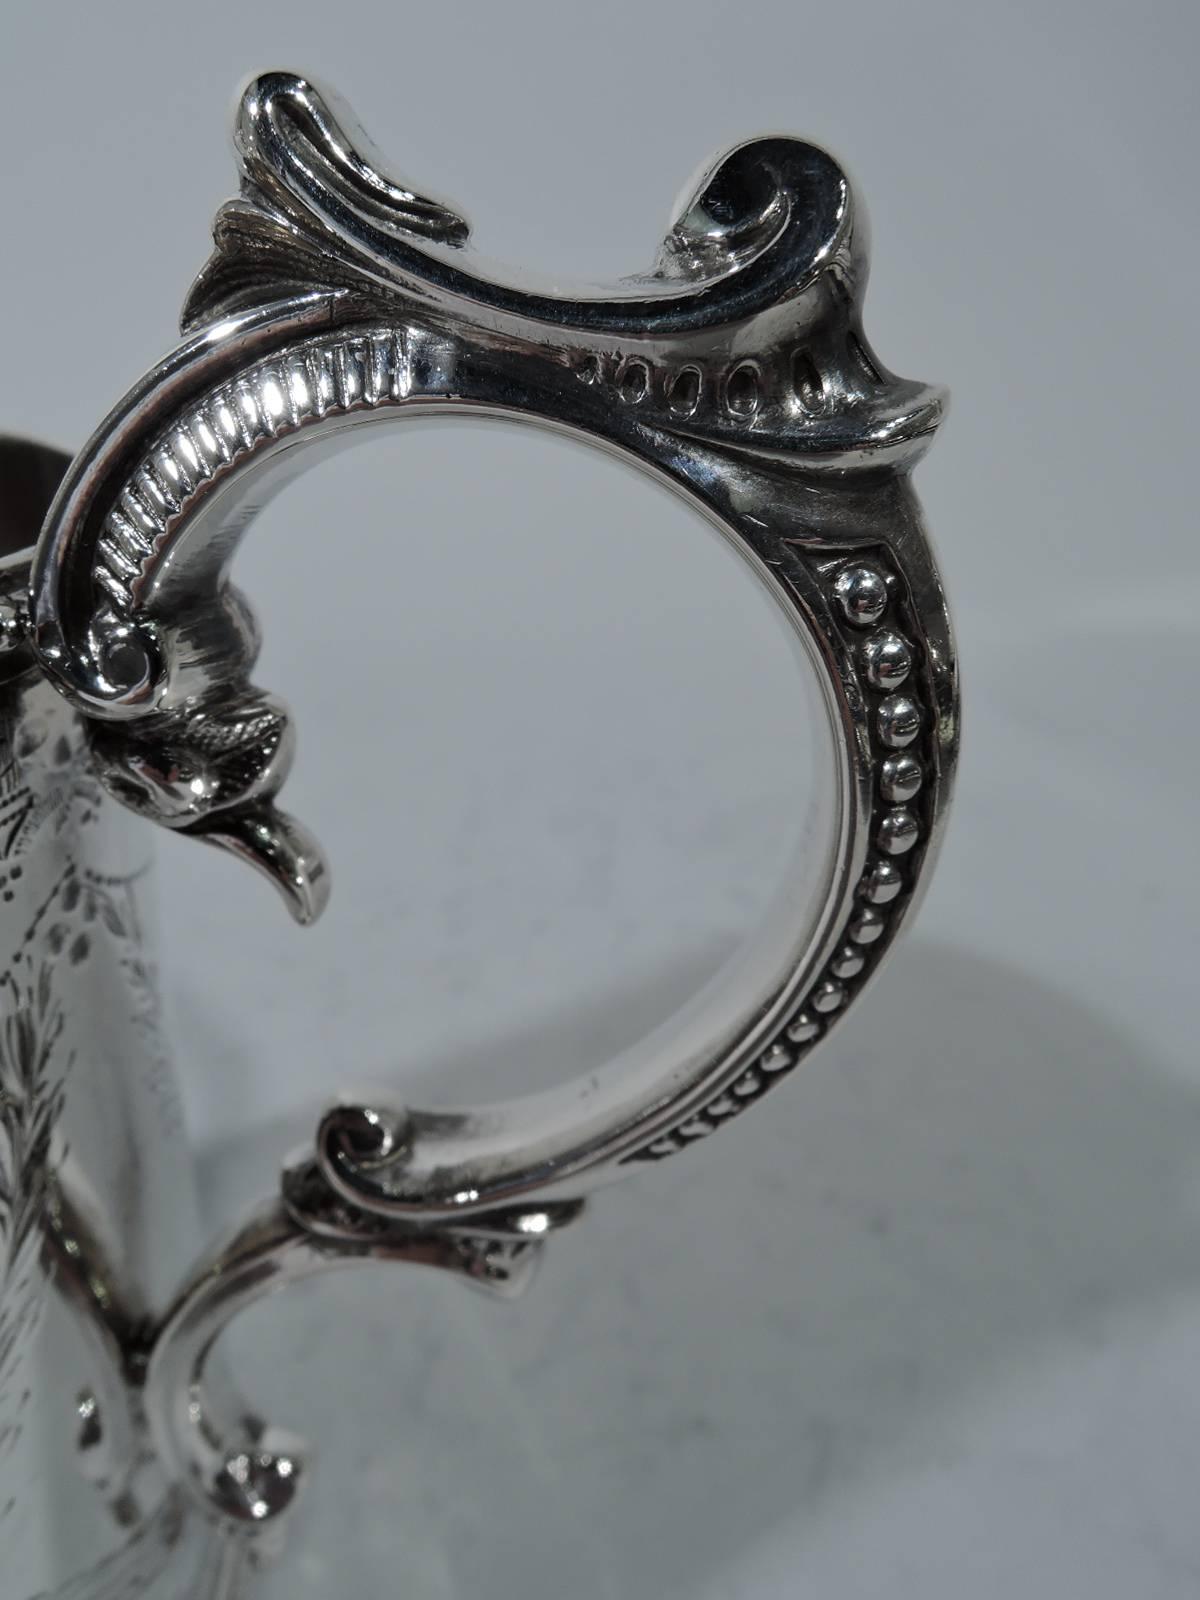 Antique English Victorian Neoclassical Sterling Silver Baby Cup 1